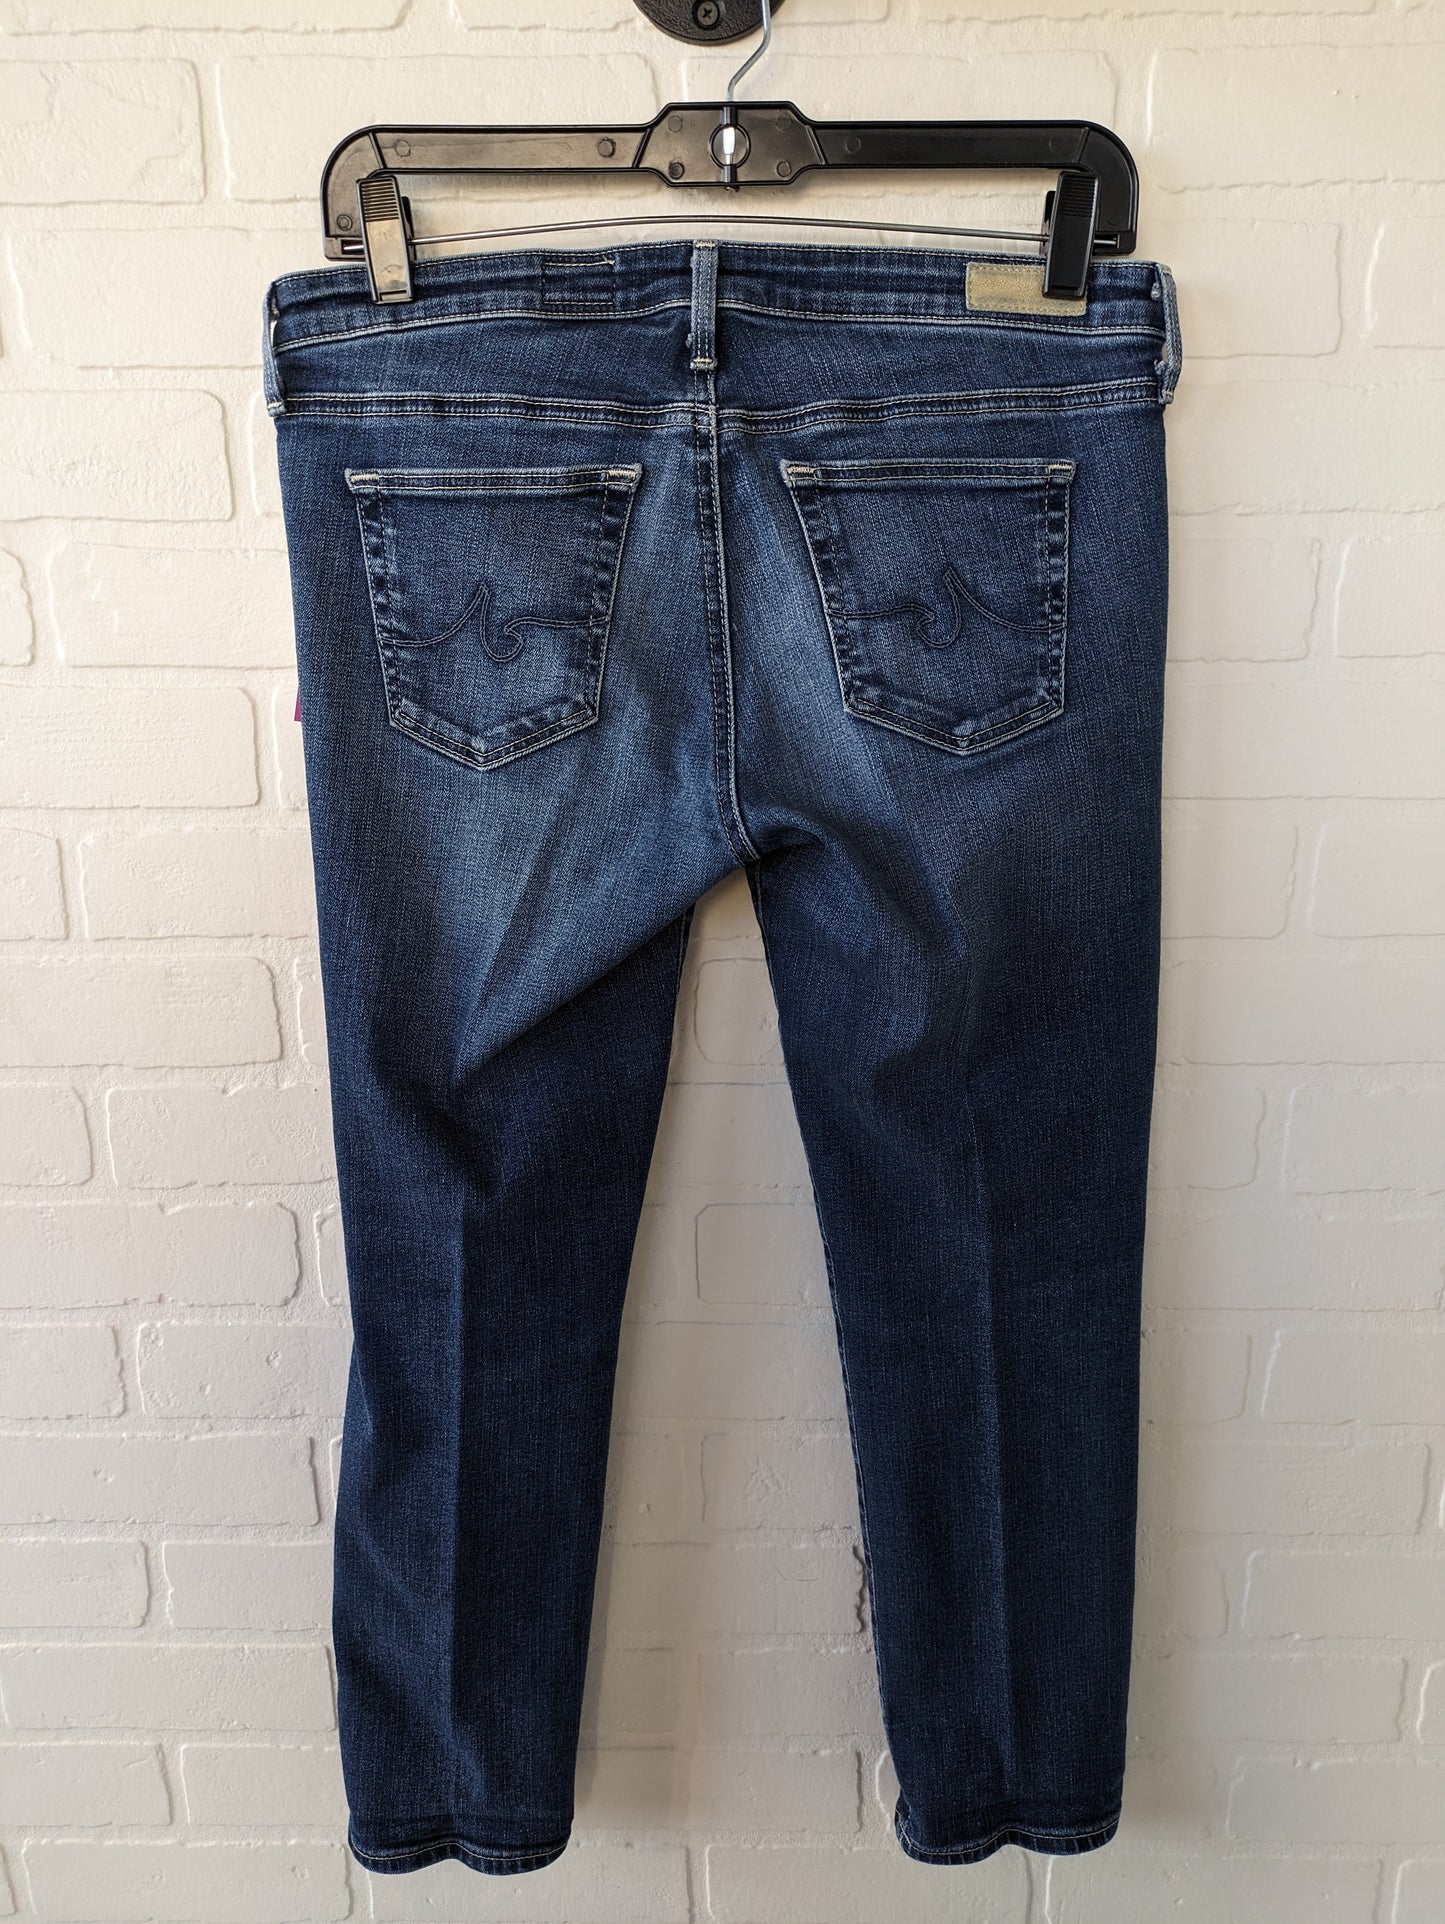 Jeans Cropped By Adriano Goldschmied  Size: 6